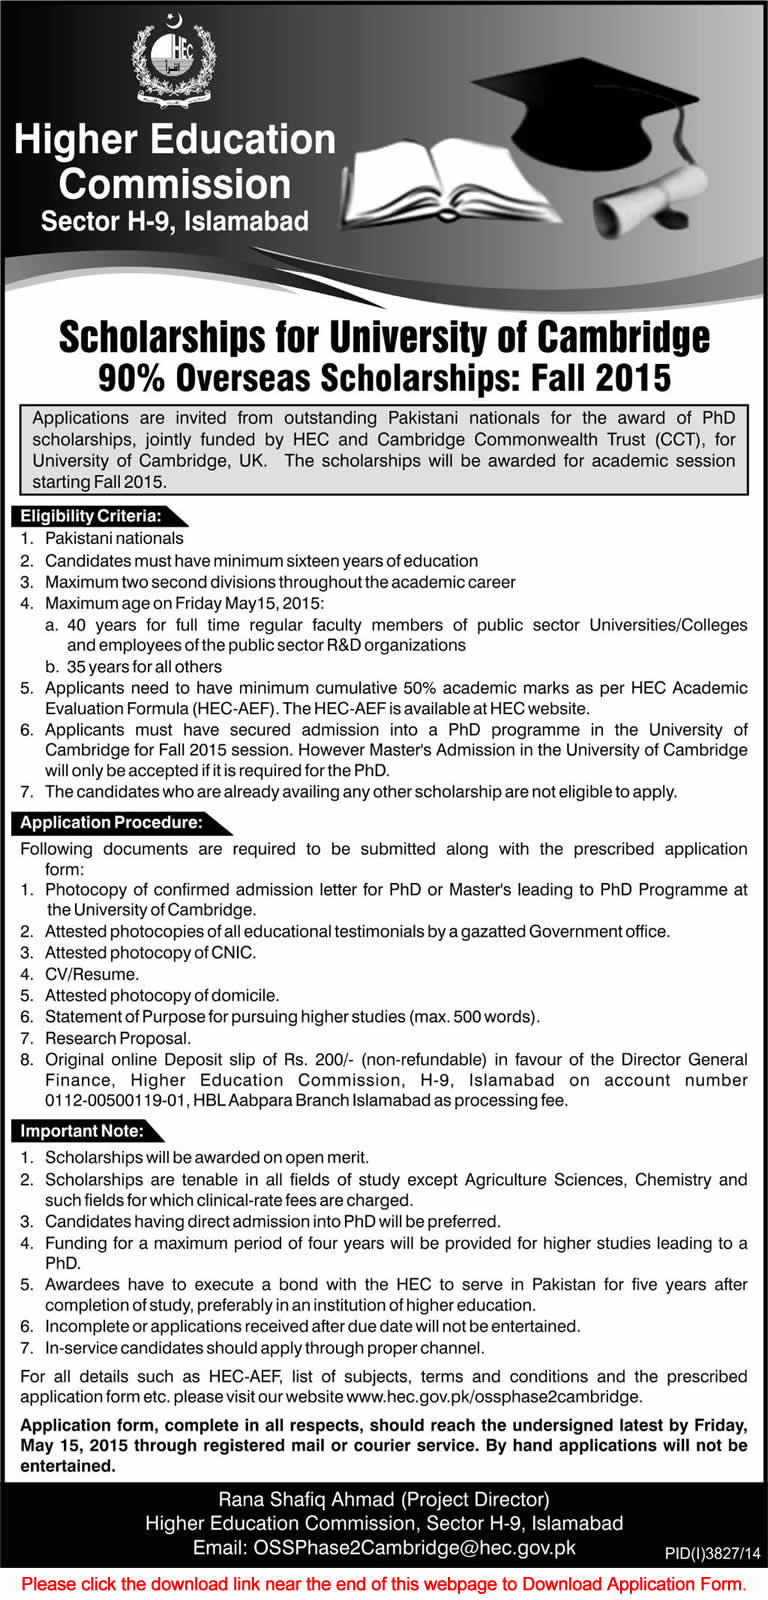 HEC Scholarships for University of Cambridge 2015 Application Form Download